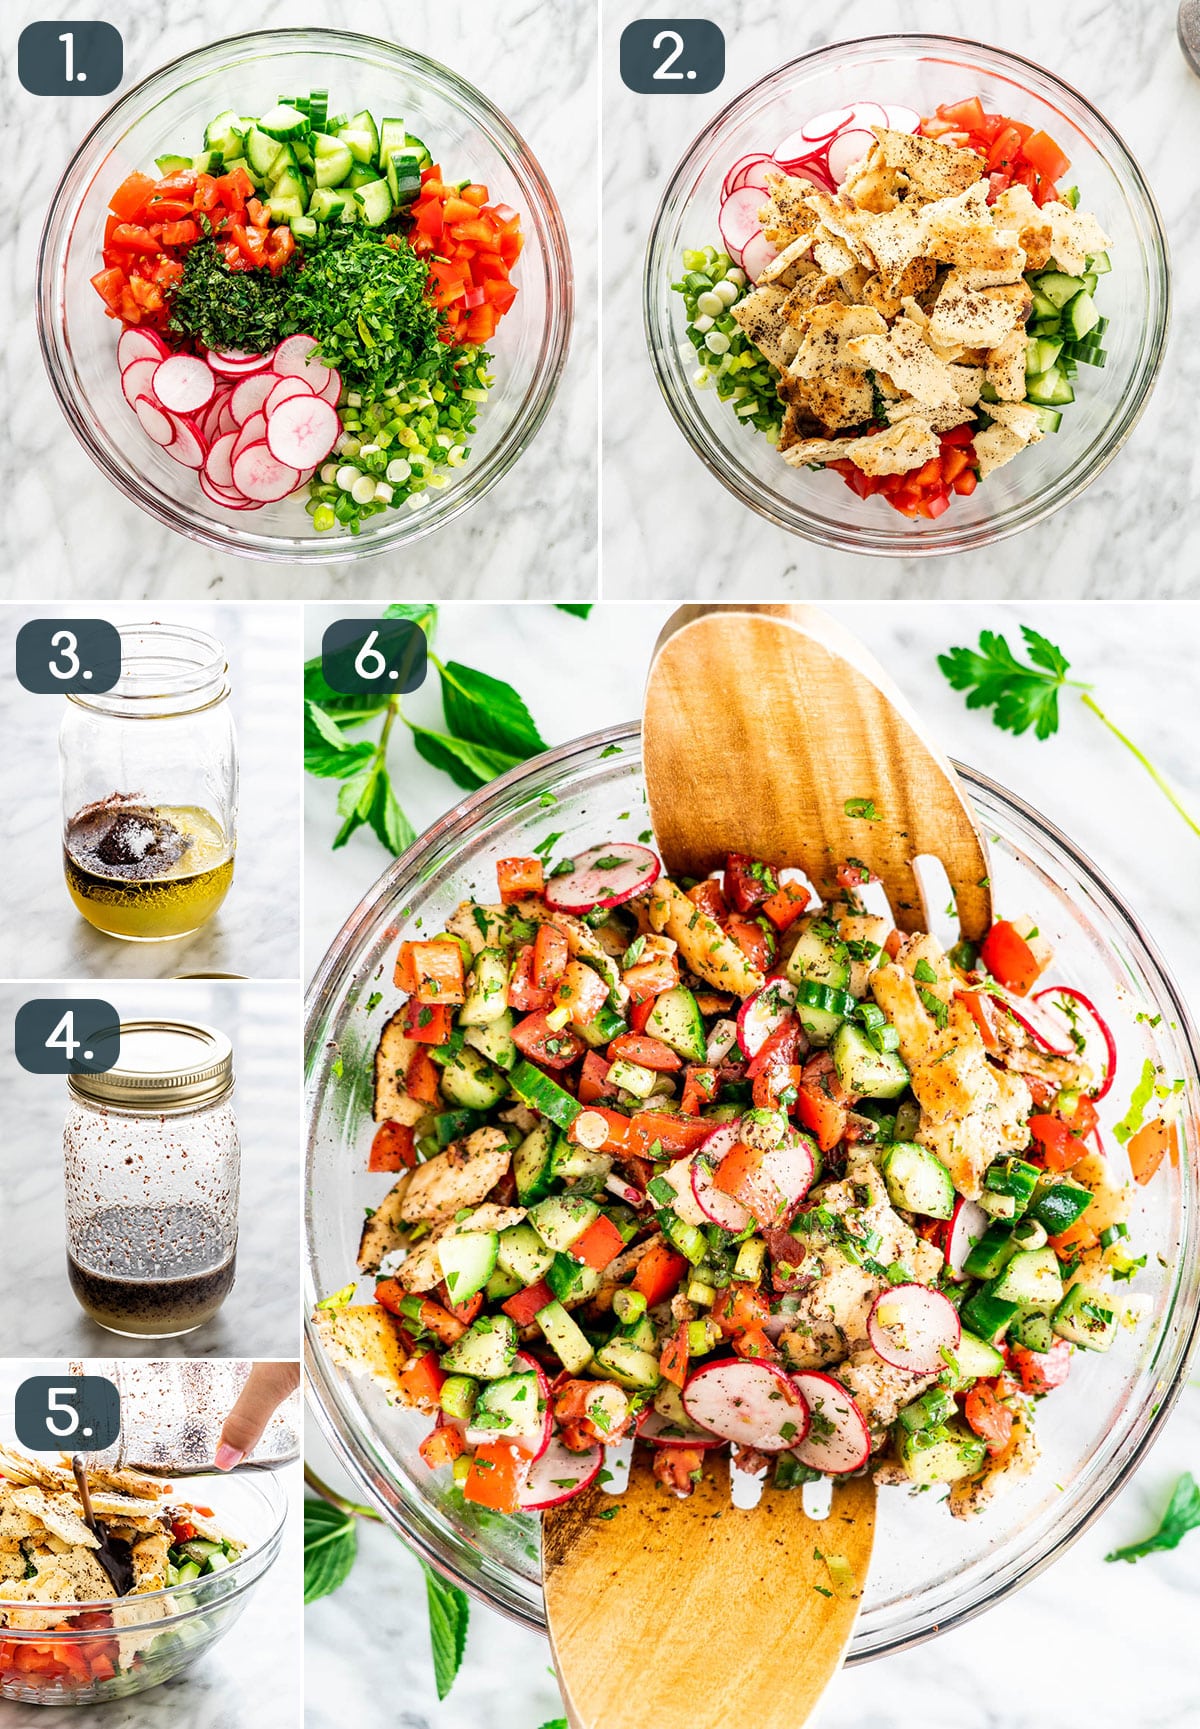 process shots showing how to make fattoush salad